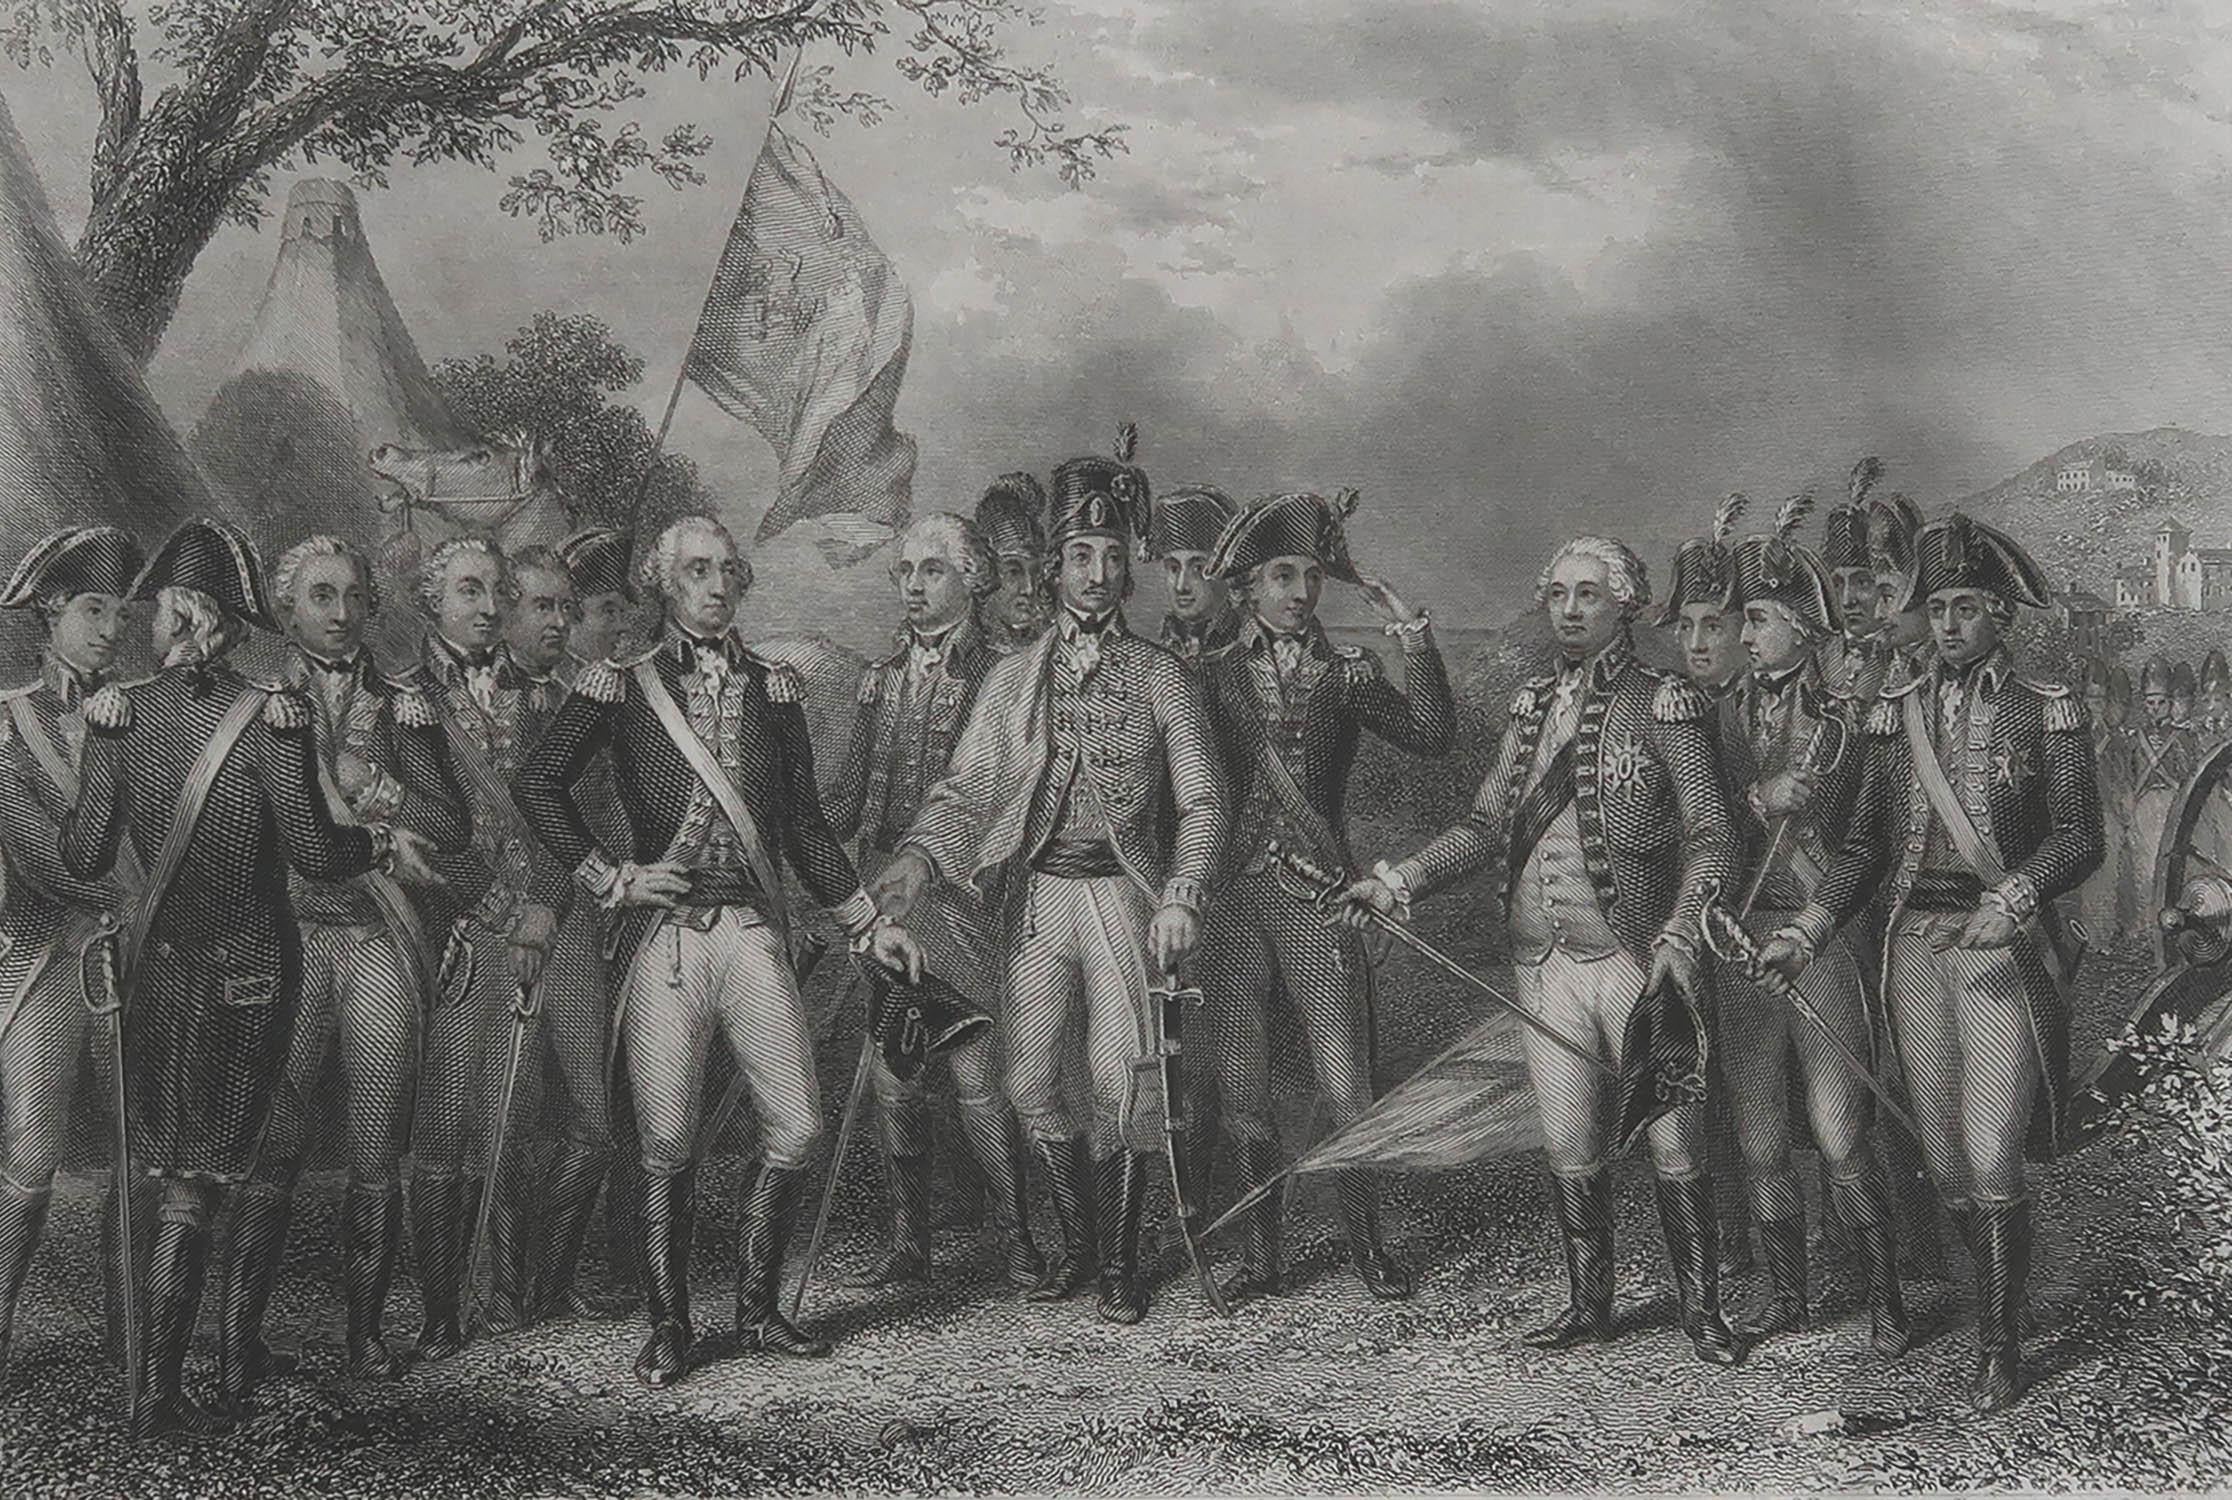 Wonderful image of The Surrender of The British to General Washington

Fine steel engraving after J.F. Renault

Published by Virtue circa 1850

Unframed.

